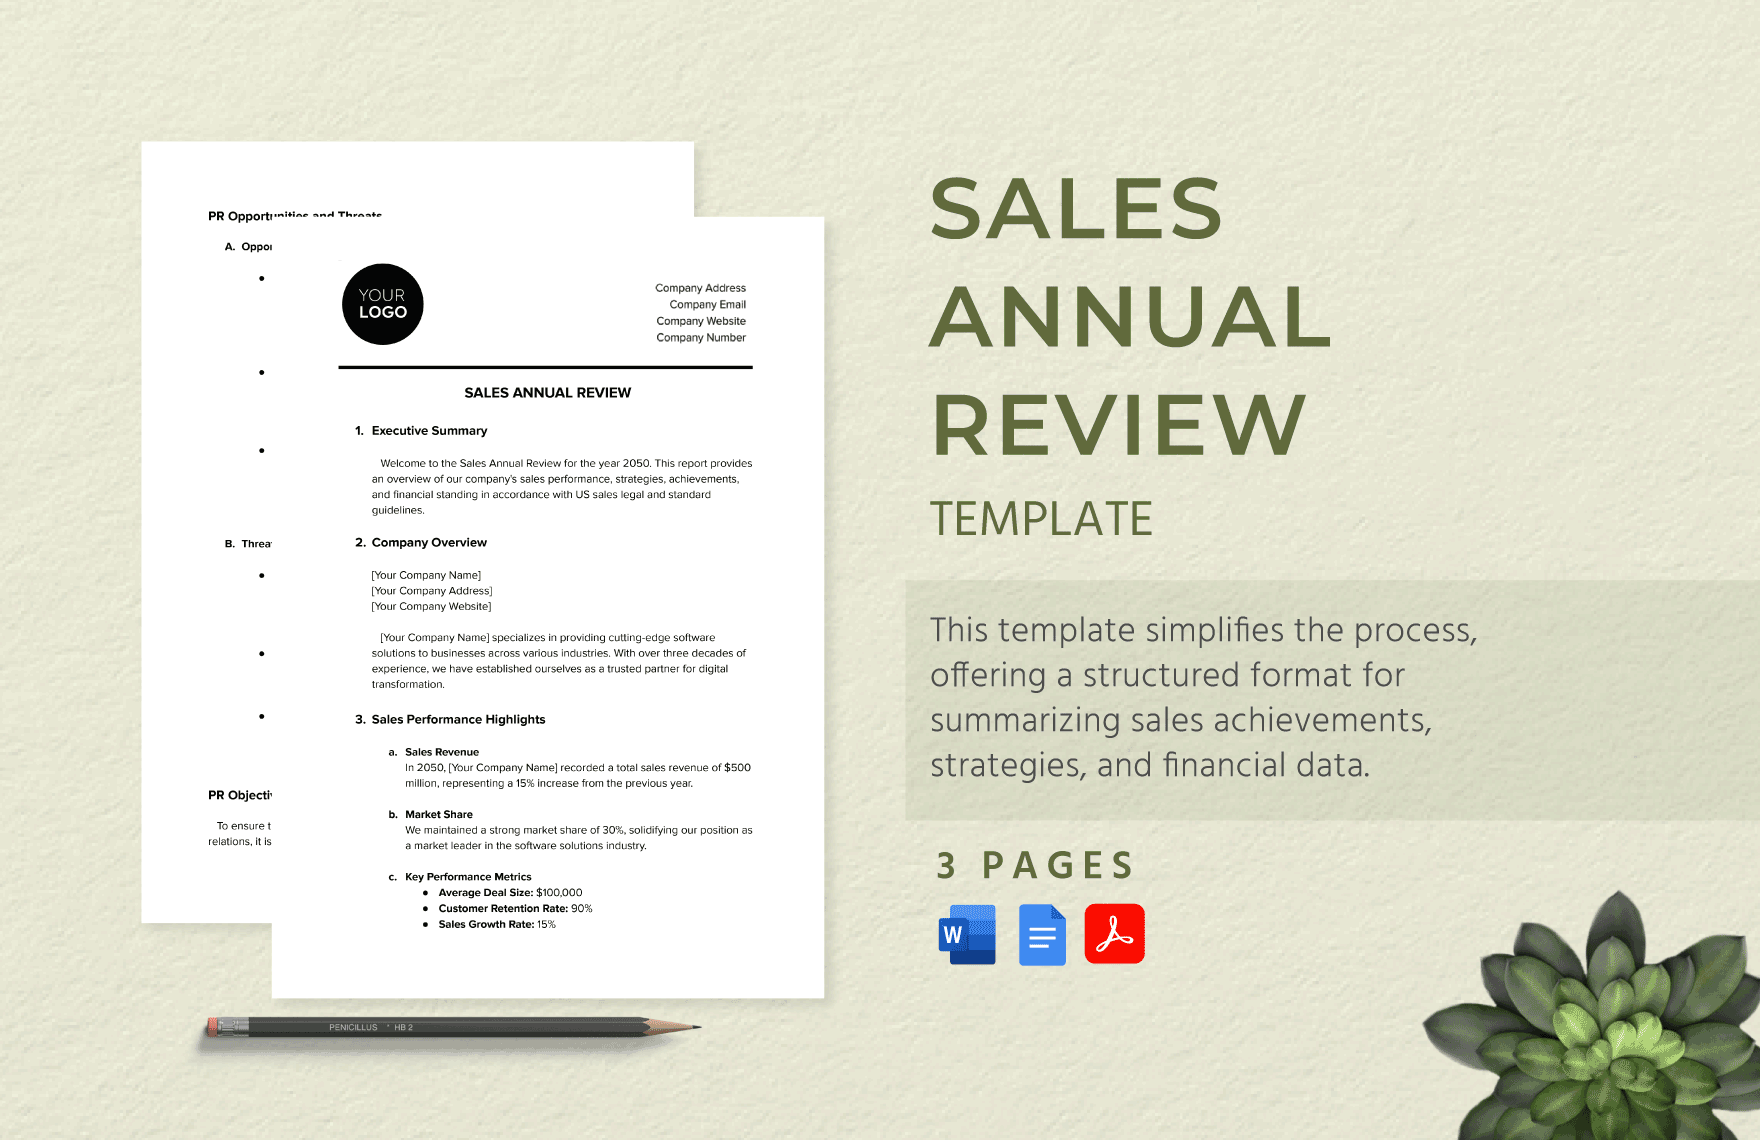 Sales Annual Review Template in Word, Google Docs, PDF